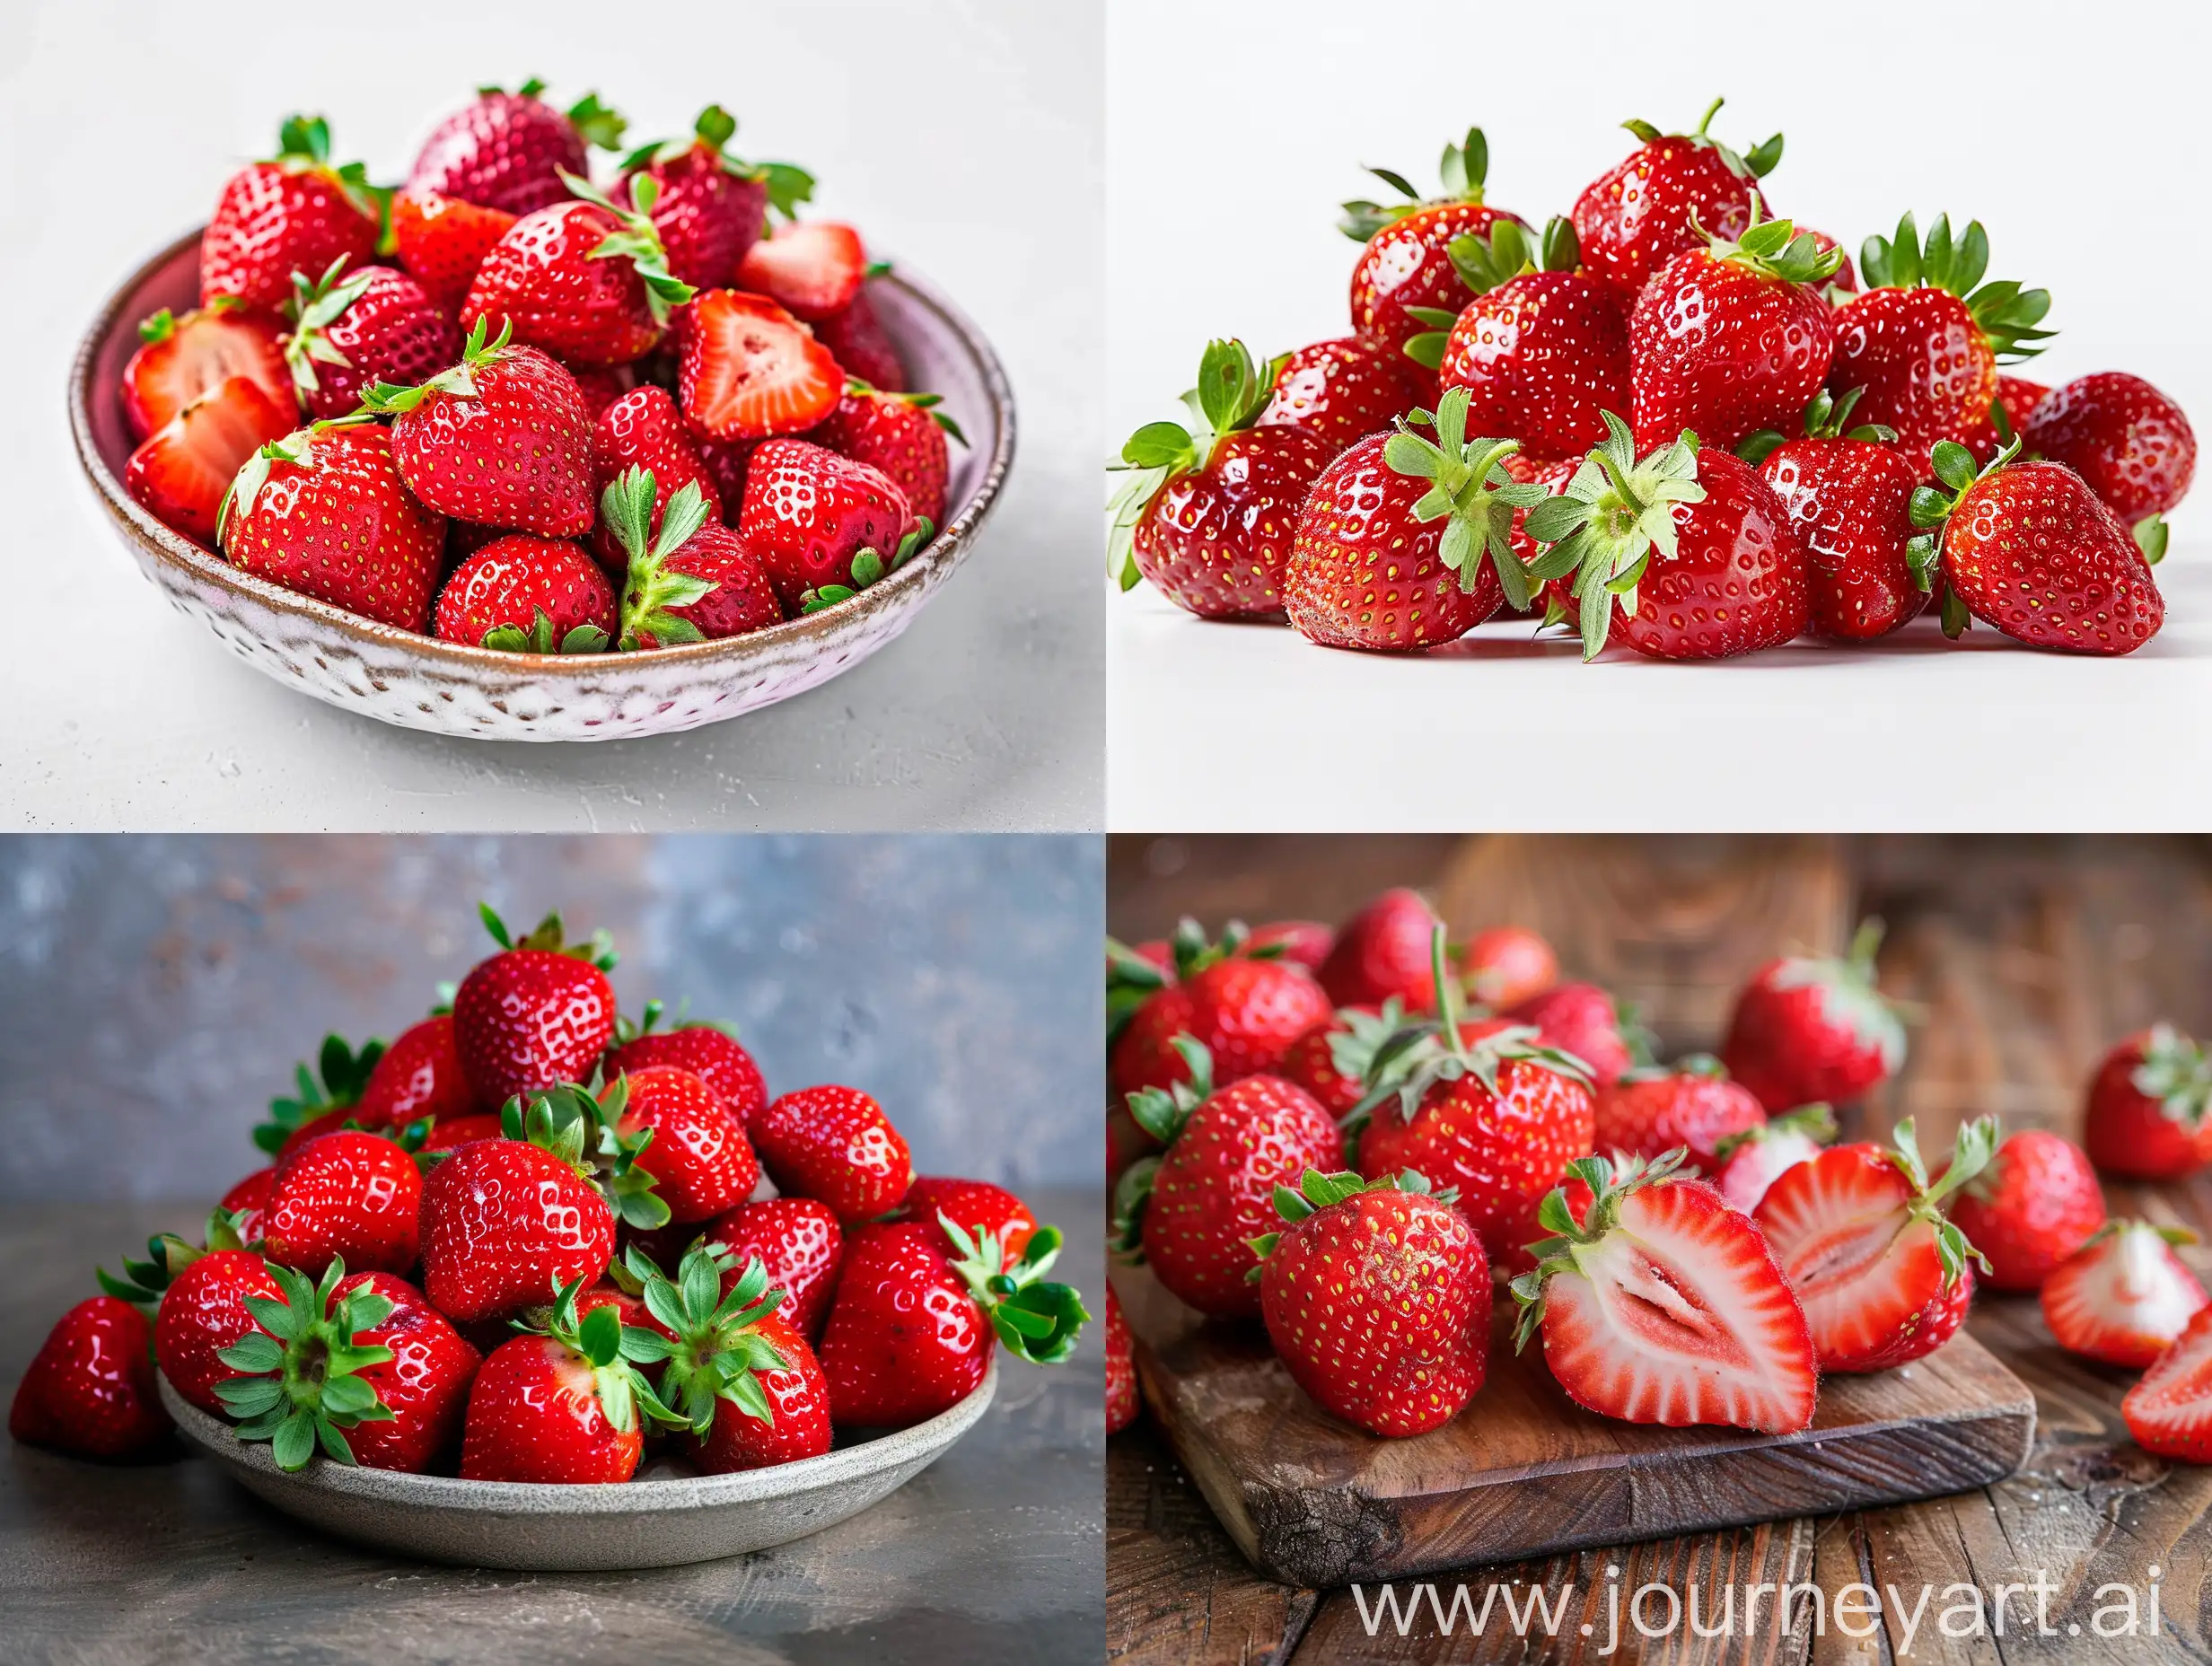 Studio photography about the benefits of strawberries for pregnant women